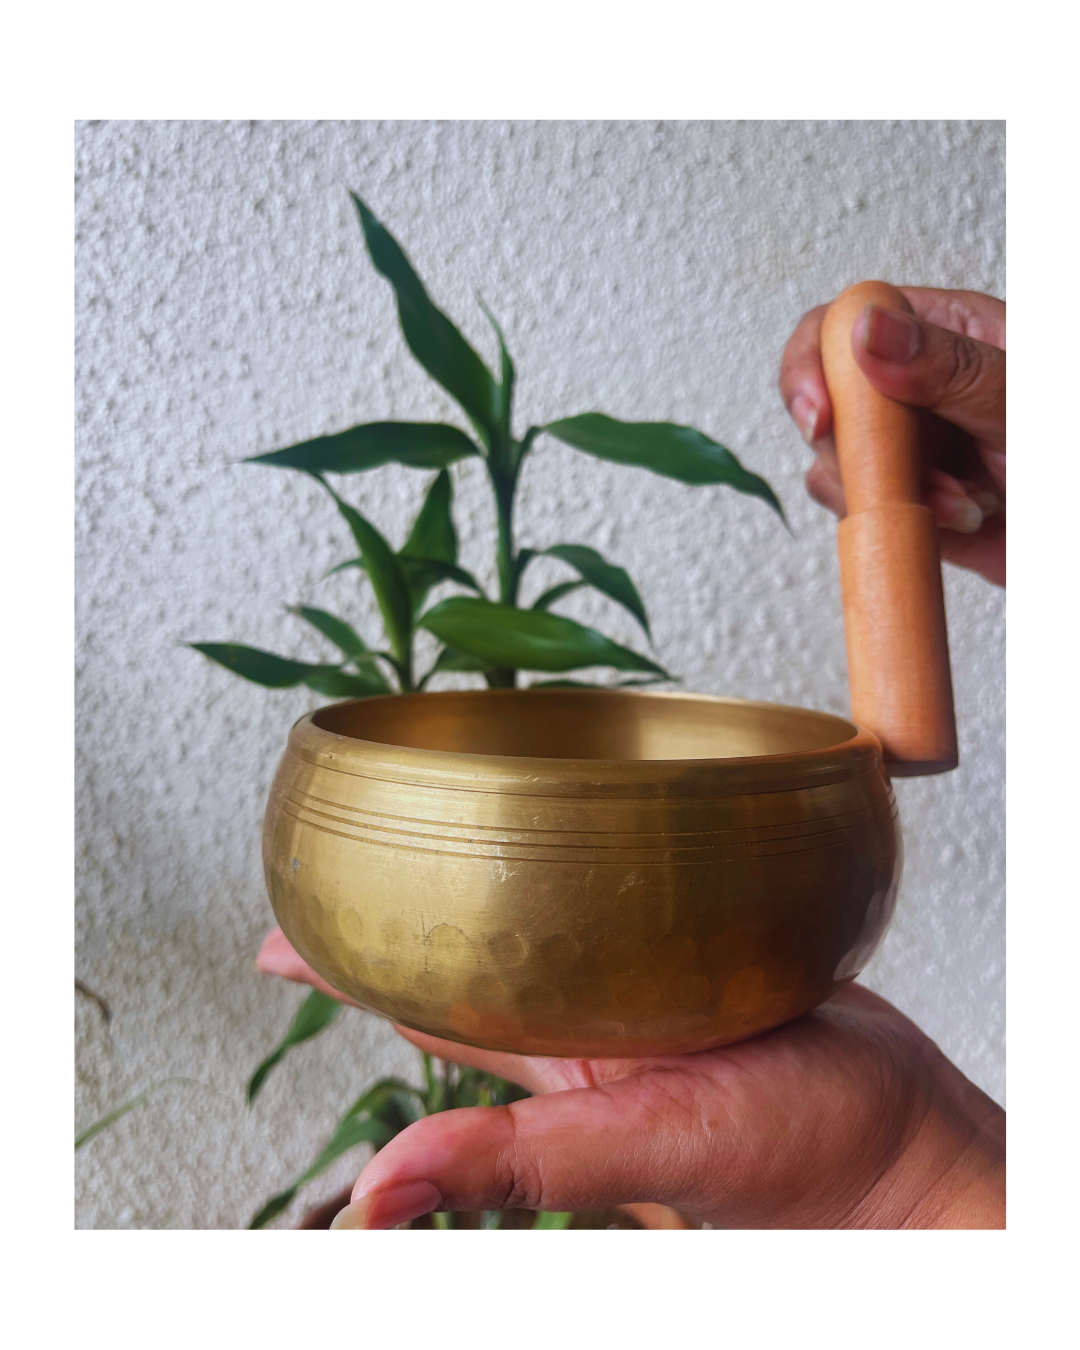 Singing Bowl - 5-metal Panchaloha Hand-hammered Bowl (5 inch) with Wooden Mallet